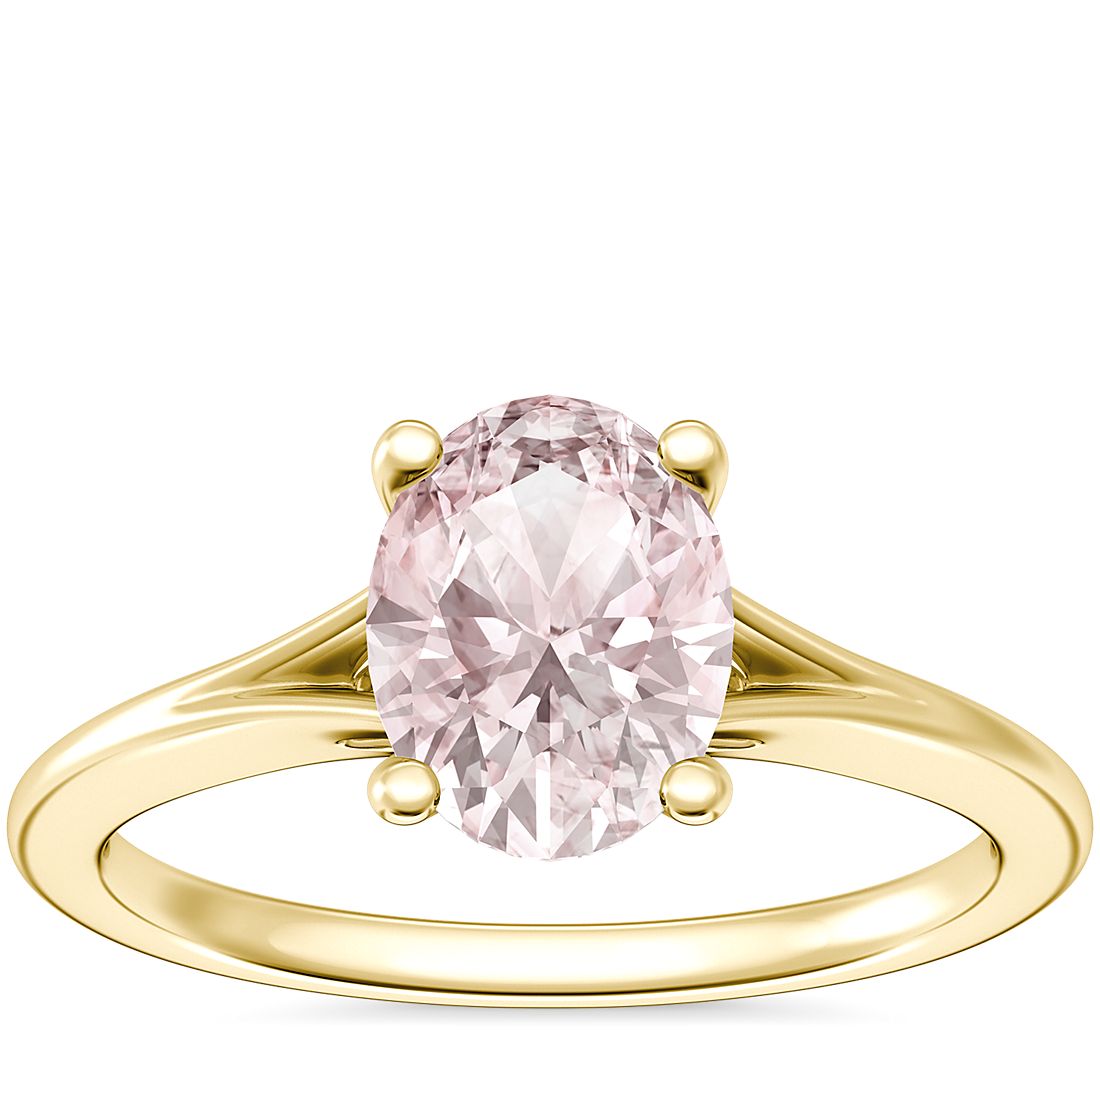 Petite Split Shank Solitaire Engagement Ring with Oval Morganite in 18k Yellow Gold (8x6mm)